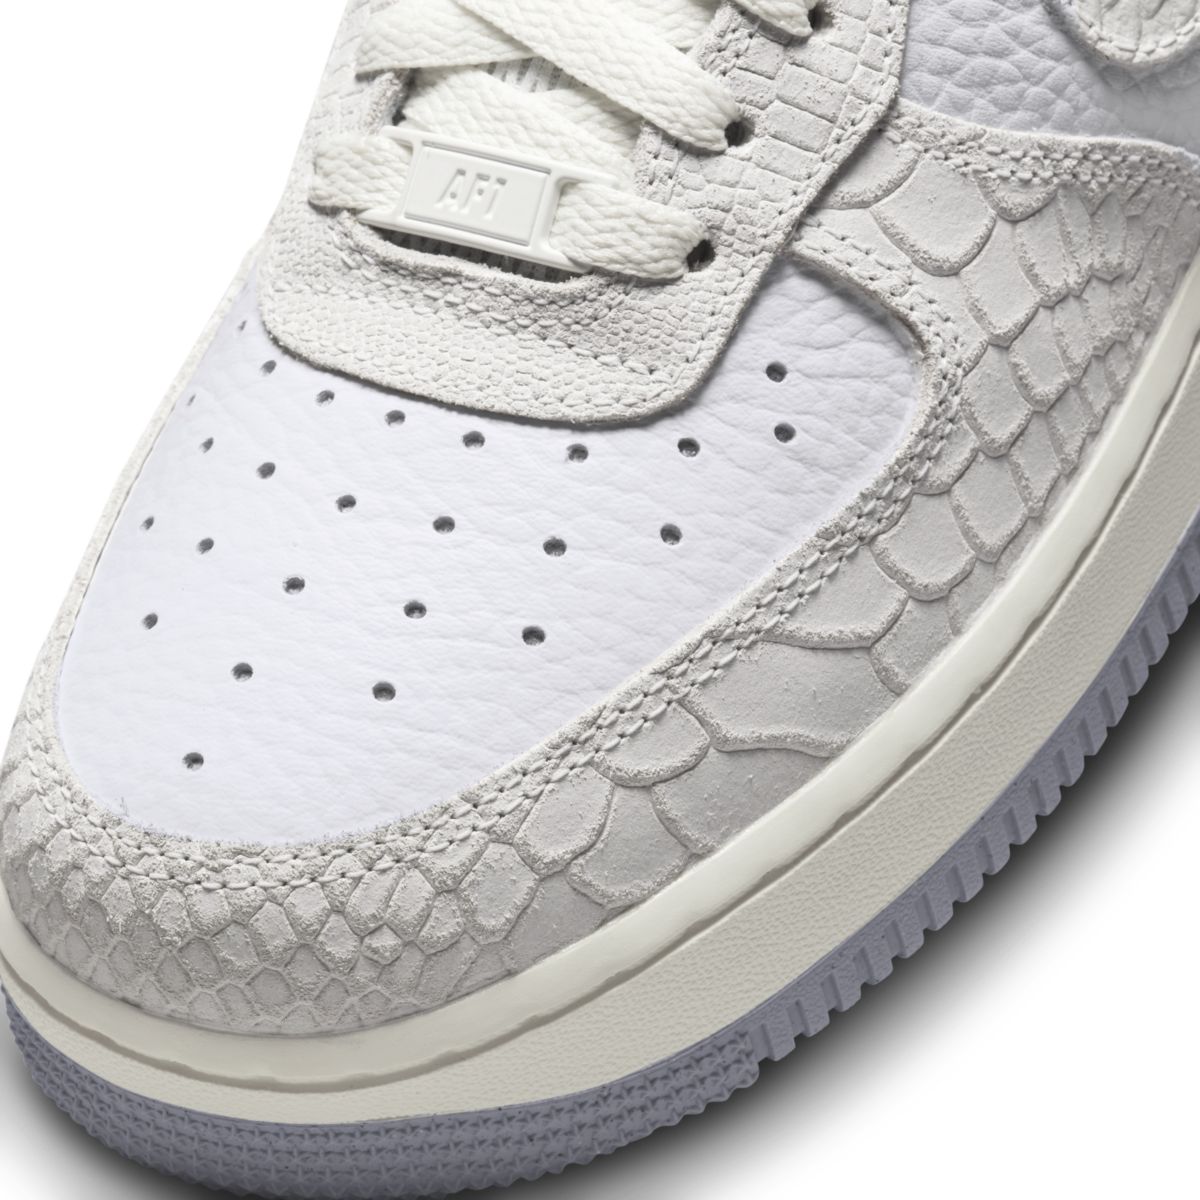 Nike Air Force 1 Low White Python DX2678-100 7